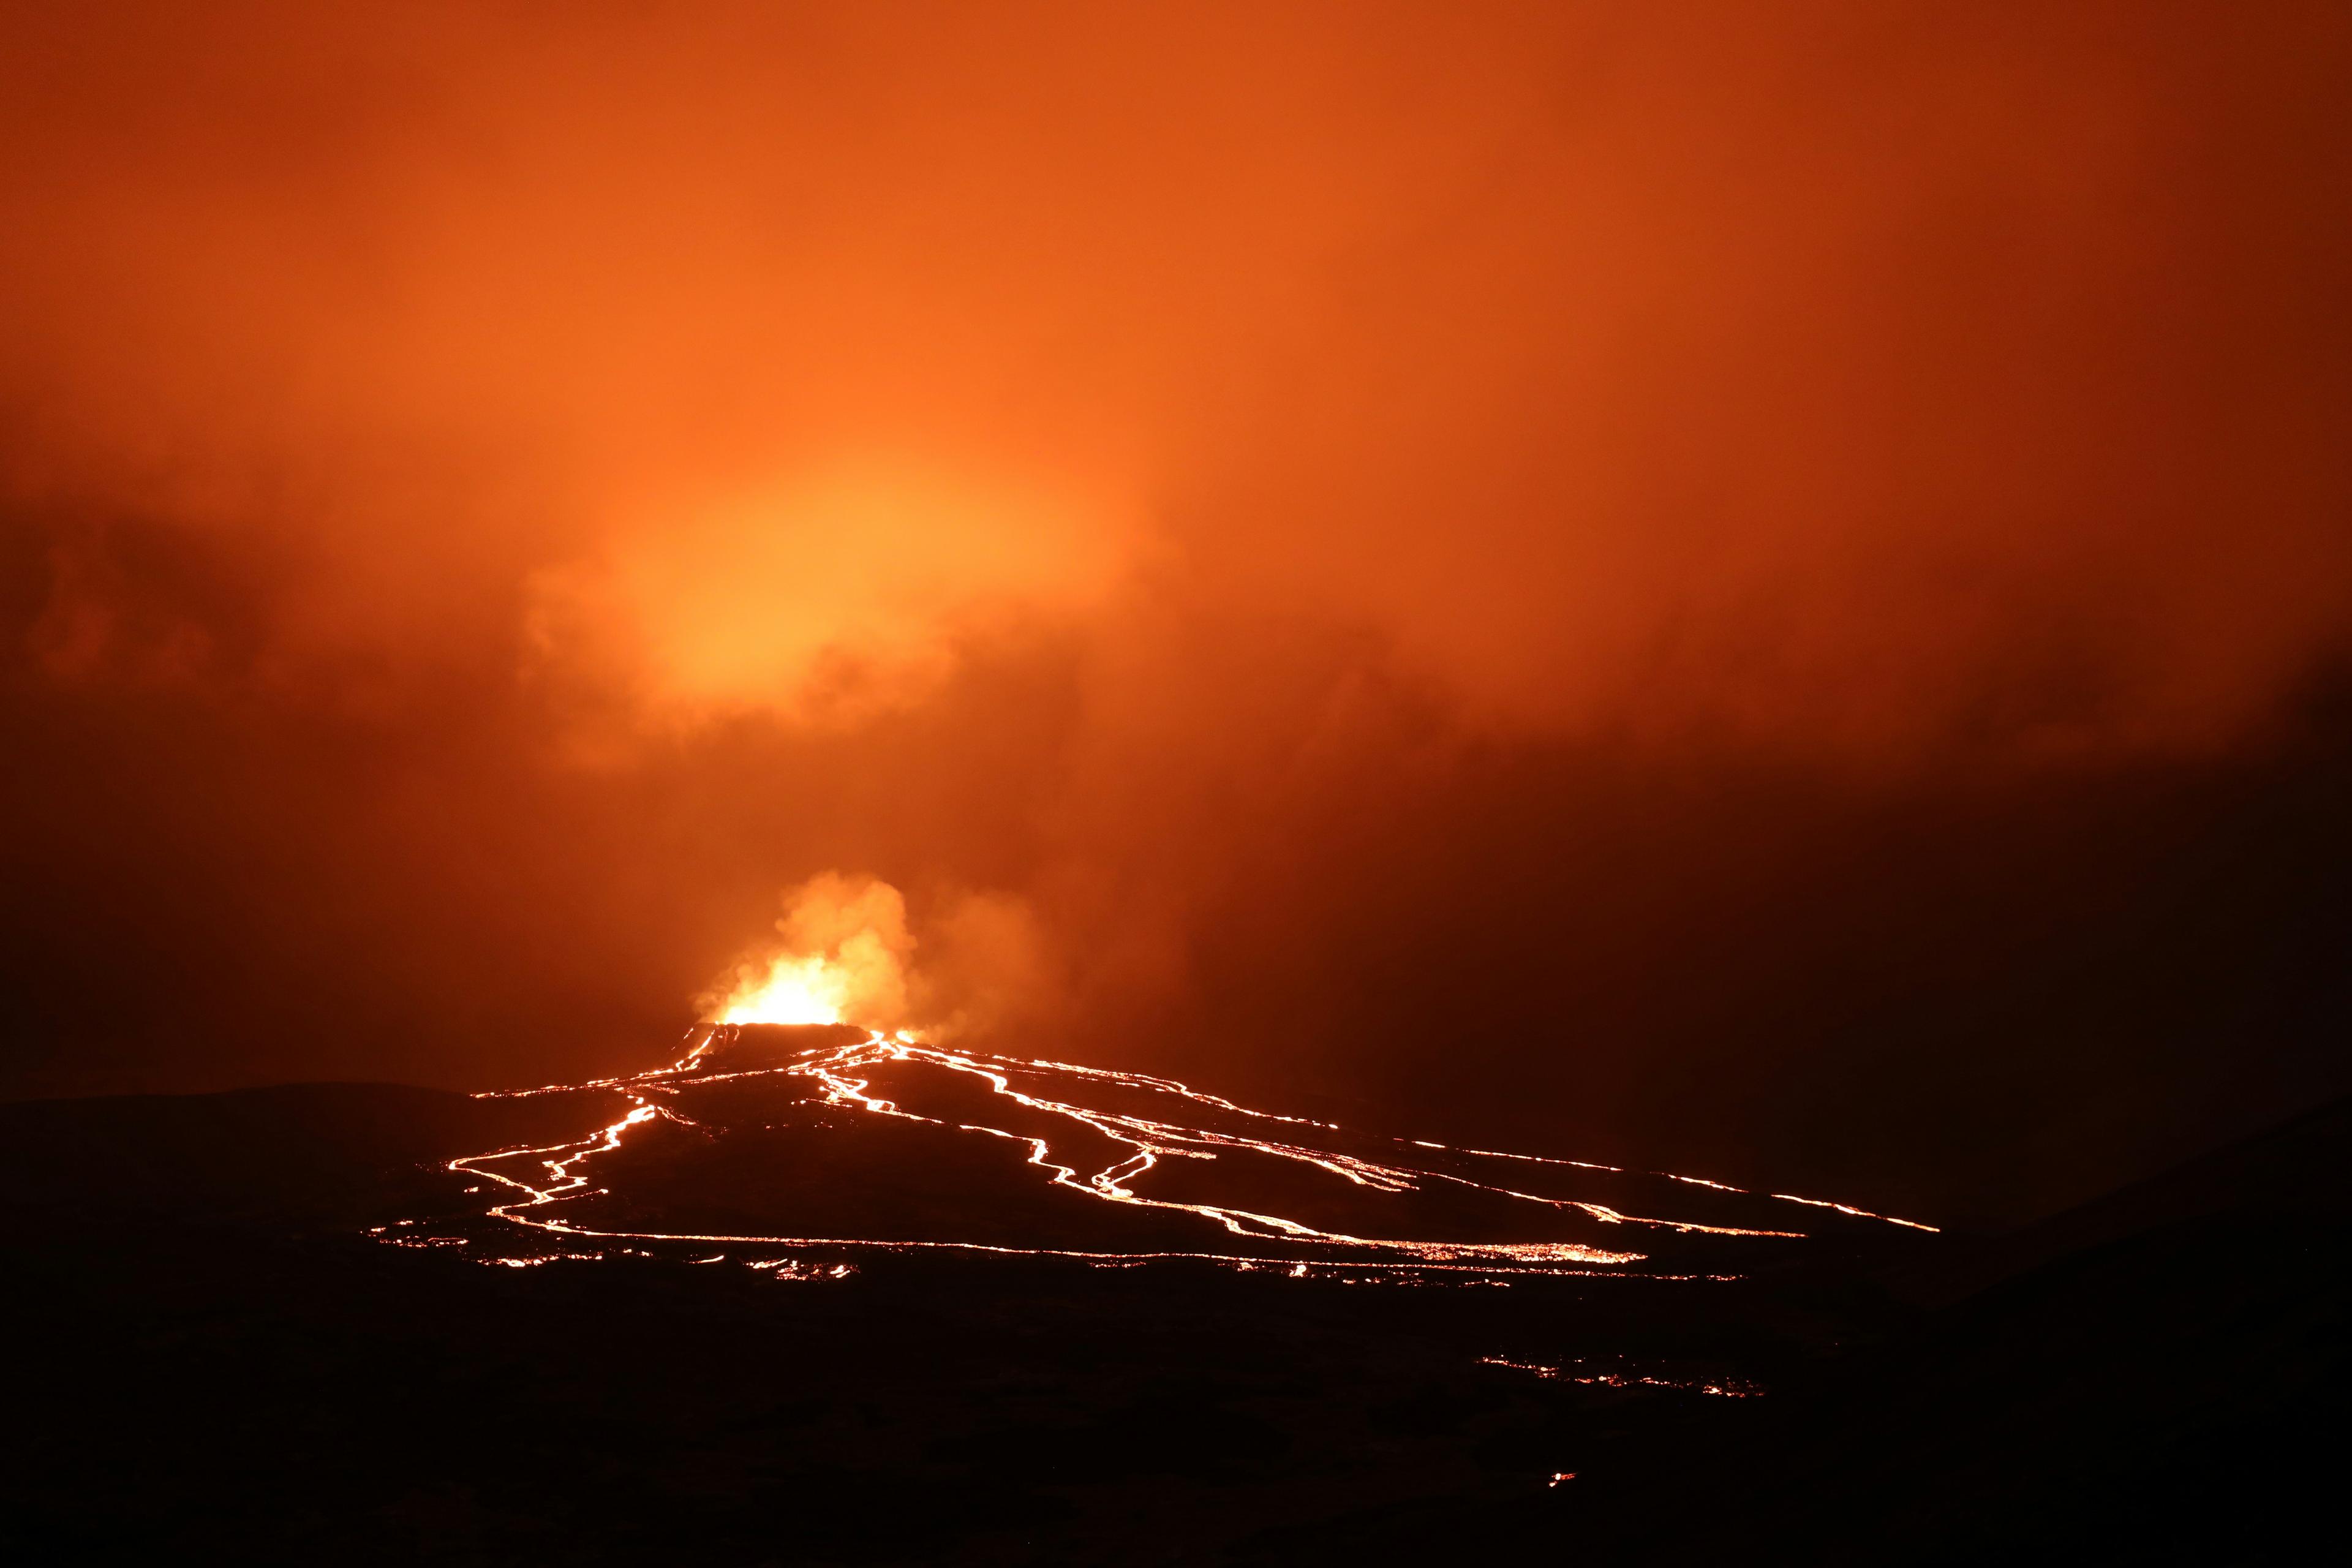 Nighttime spectacle of the Fagradalsfjall eruption, with glowing lava streams etching fiery paths down the slopes, all under a dramatic, glowing sky.